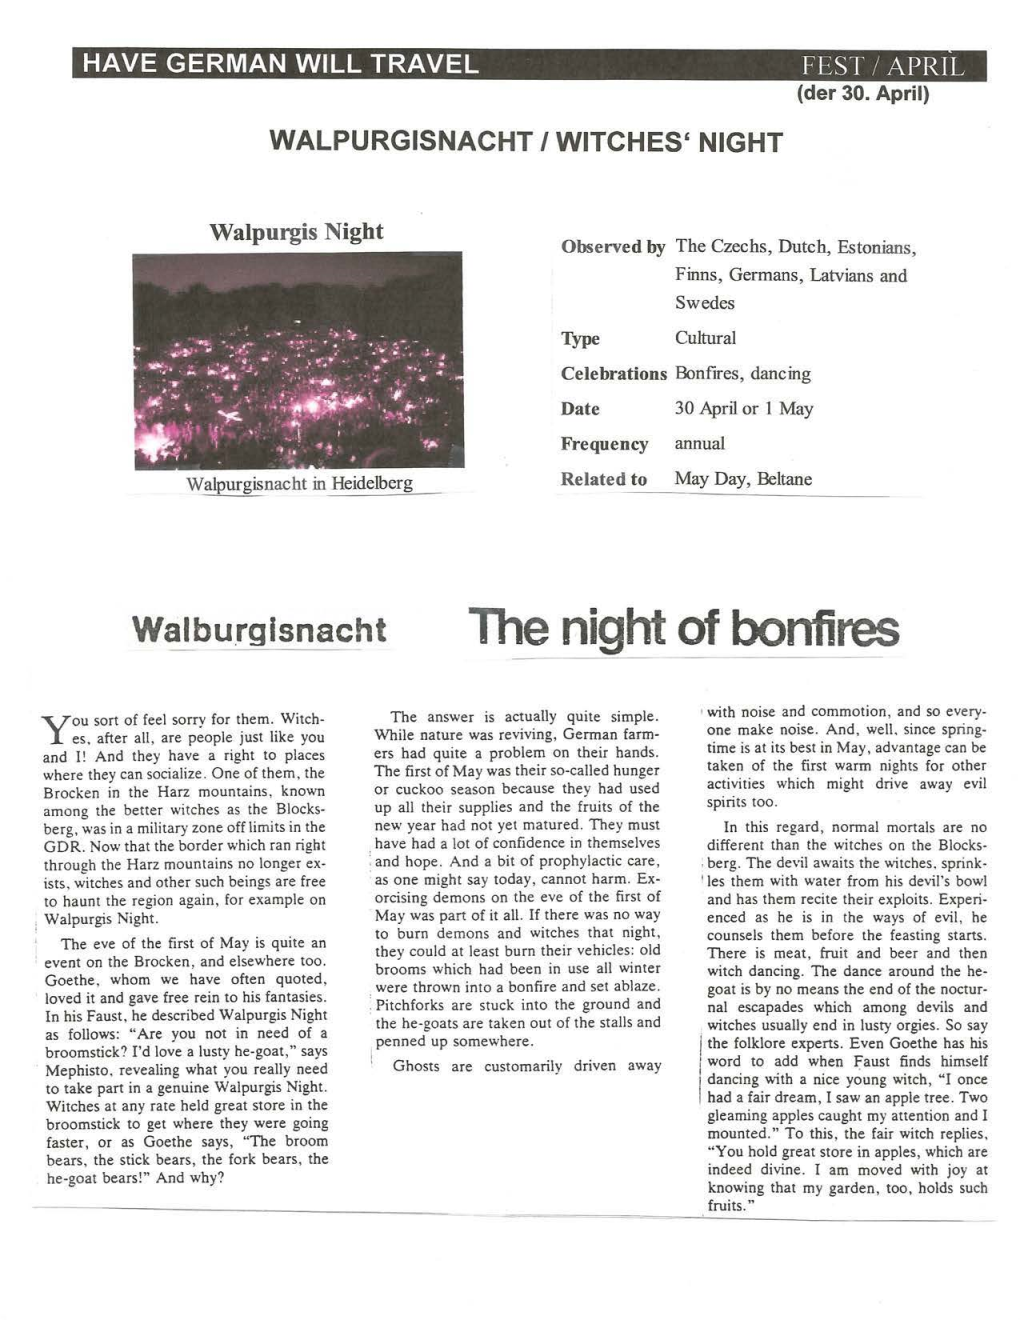 The Night of Bonfires